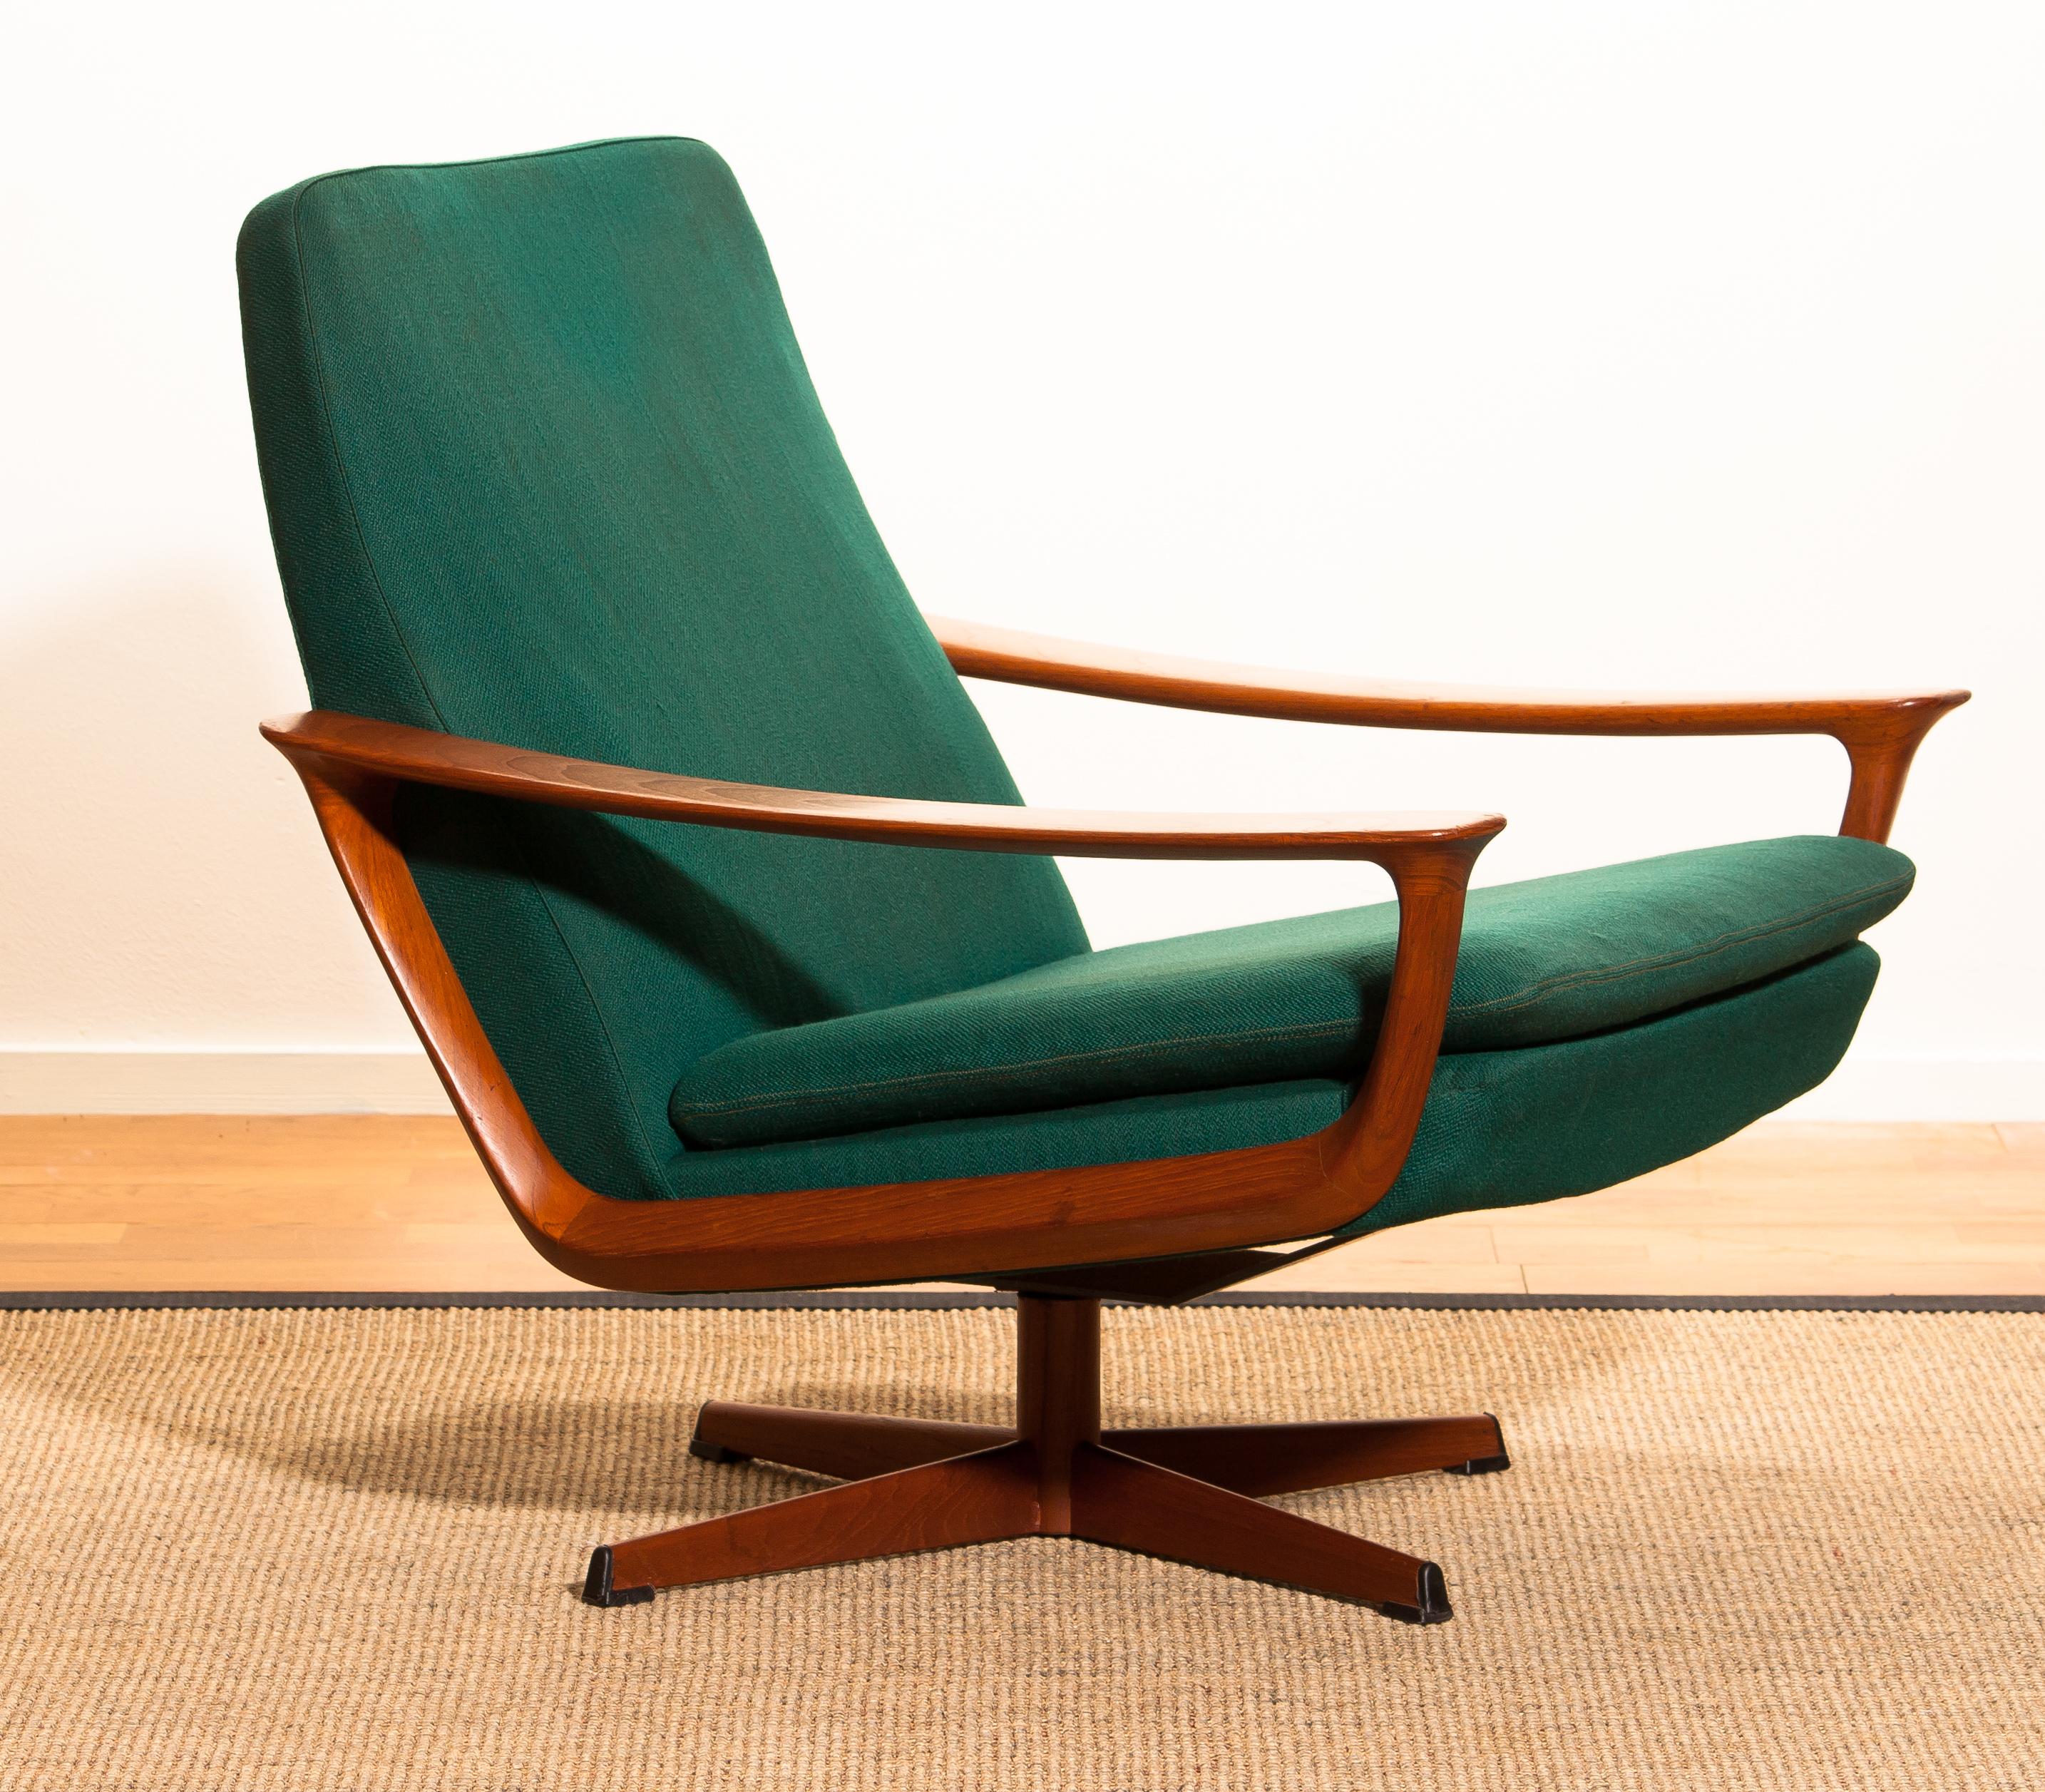 Extremely rare teak swivel chair by Johannes Andersen for Trensum, Denmark. 
The chair is in excellent condition.
Upholstery and padding shows wear consistent with age and use.
Period: 1960
The dimensions are: Height 73cm = 29inch - Wide 71cm = 28